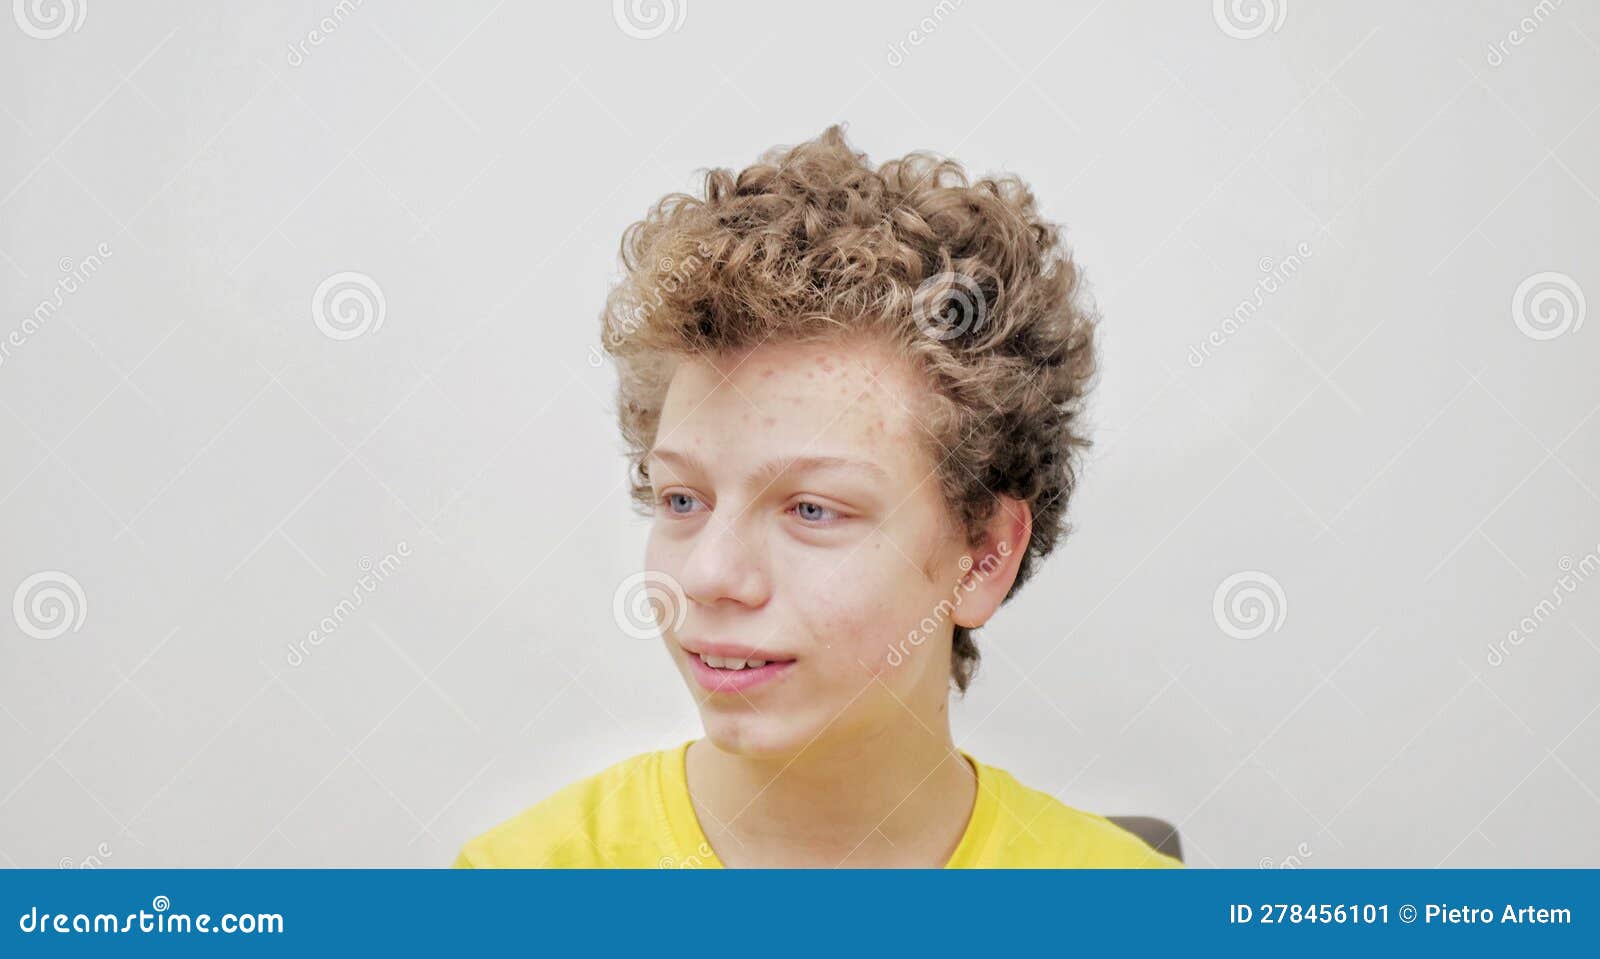 Curly Hair on a Guy with Blonde Hair - wide 5